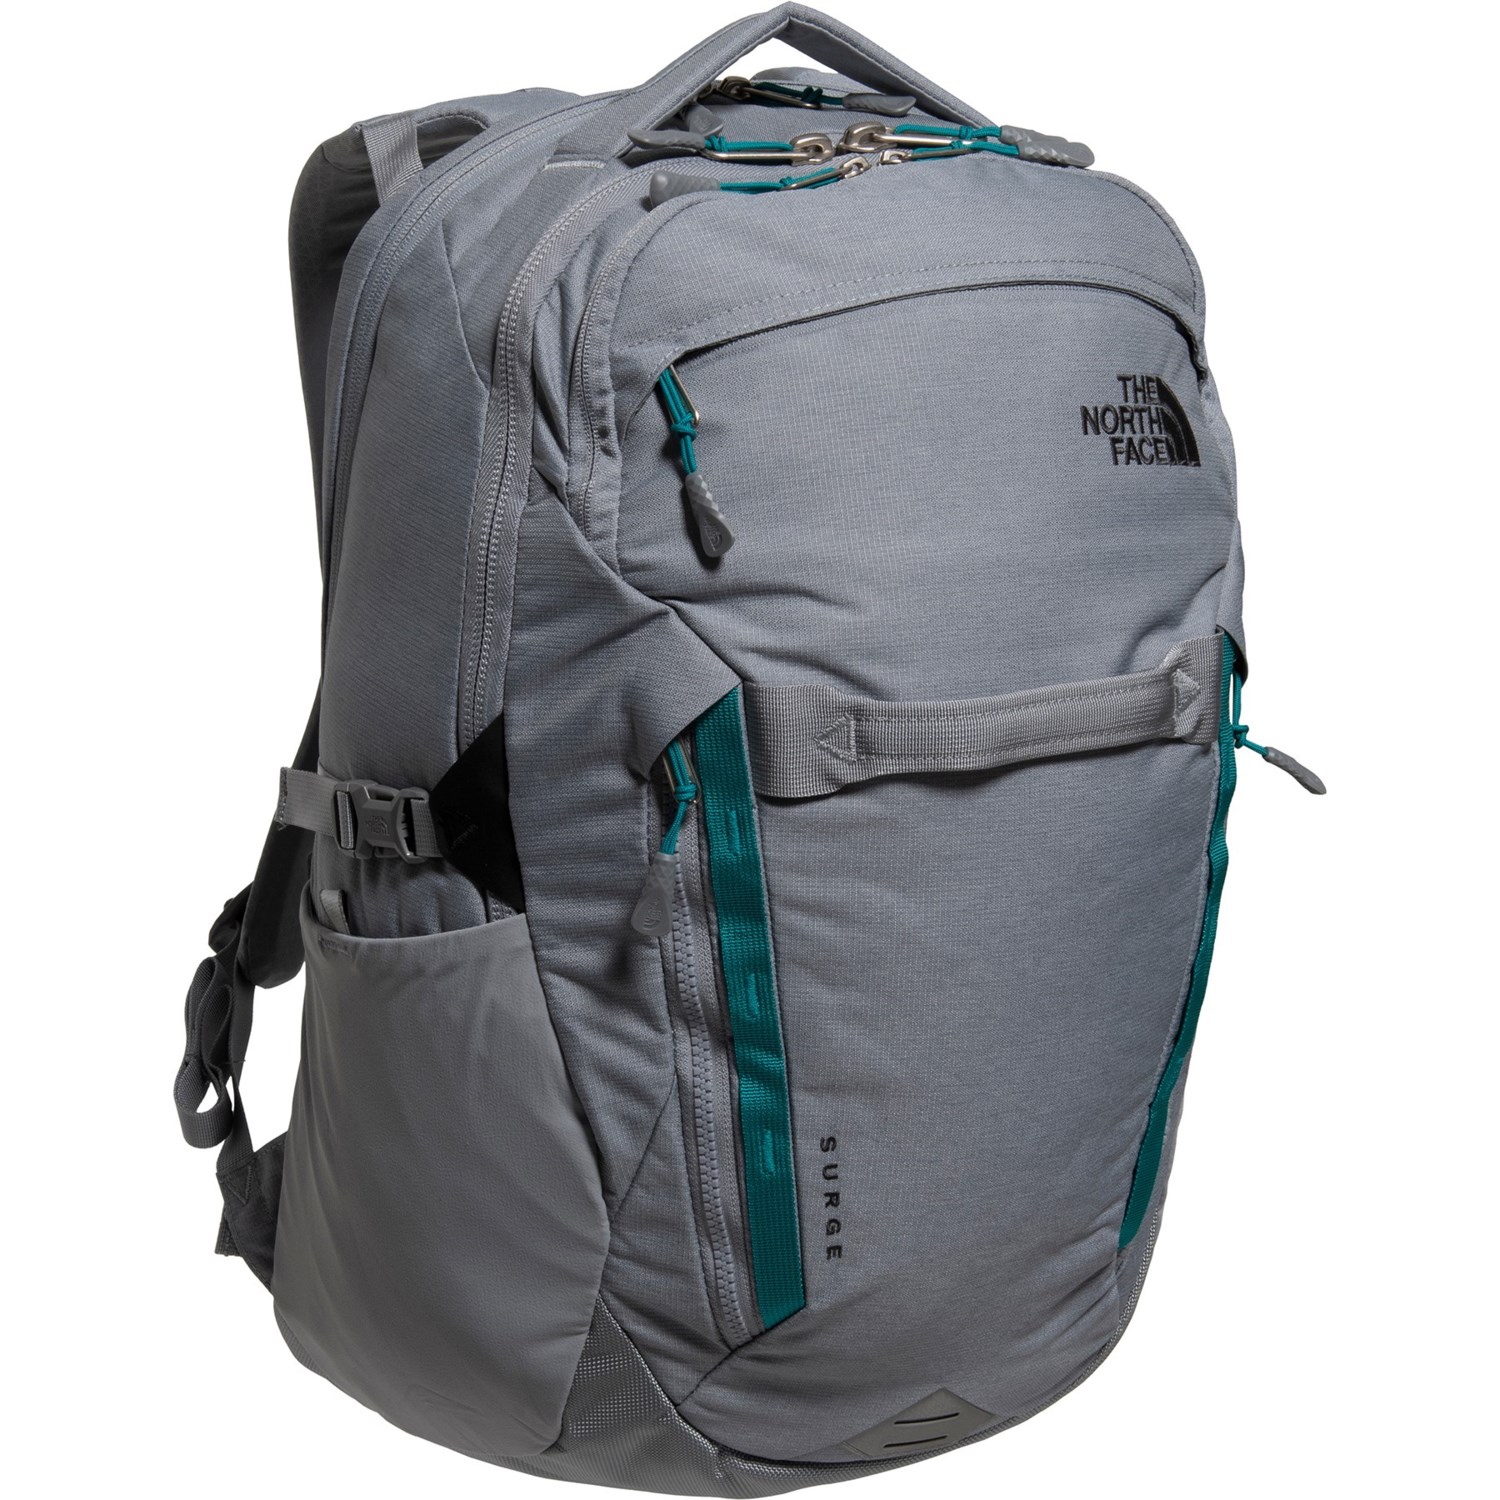 The North Face Surge 31 L Backpack For Men And Women